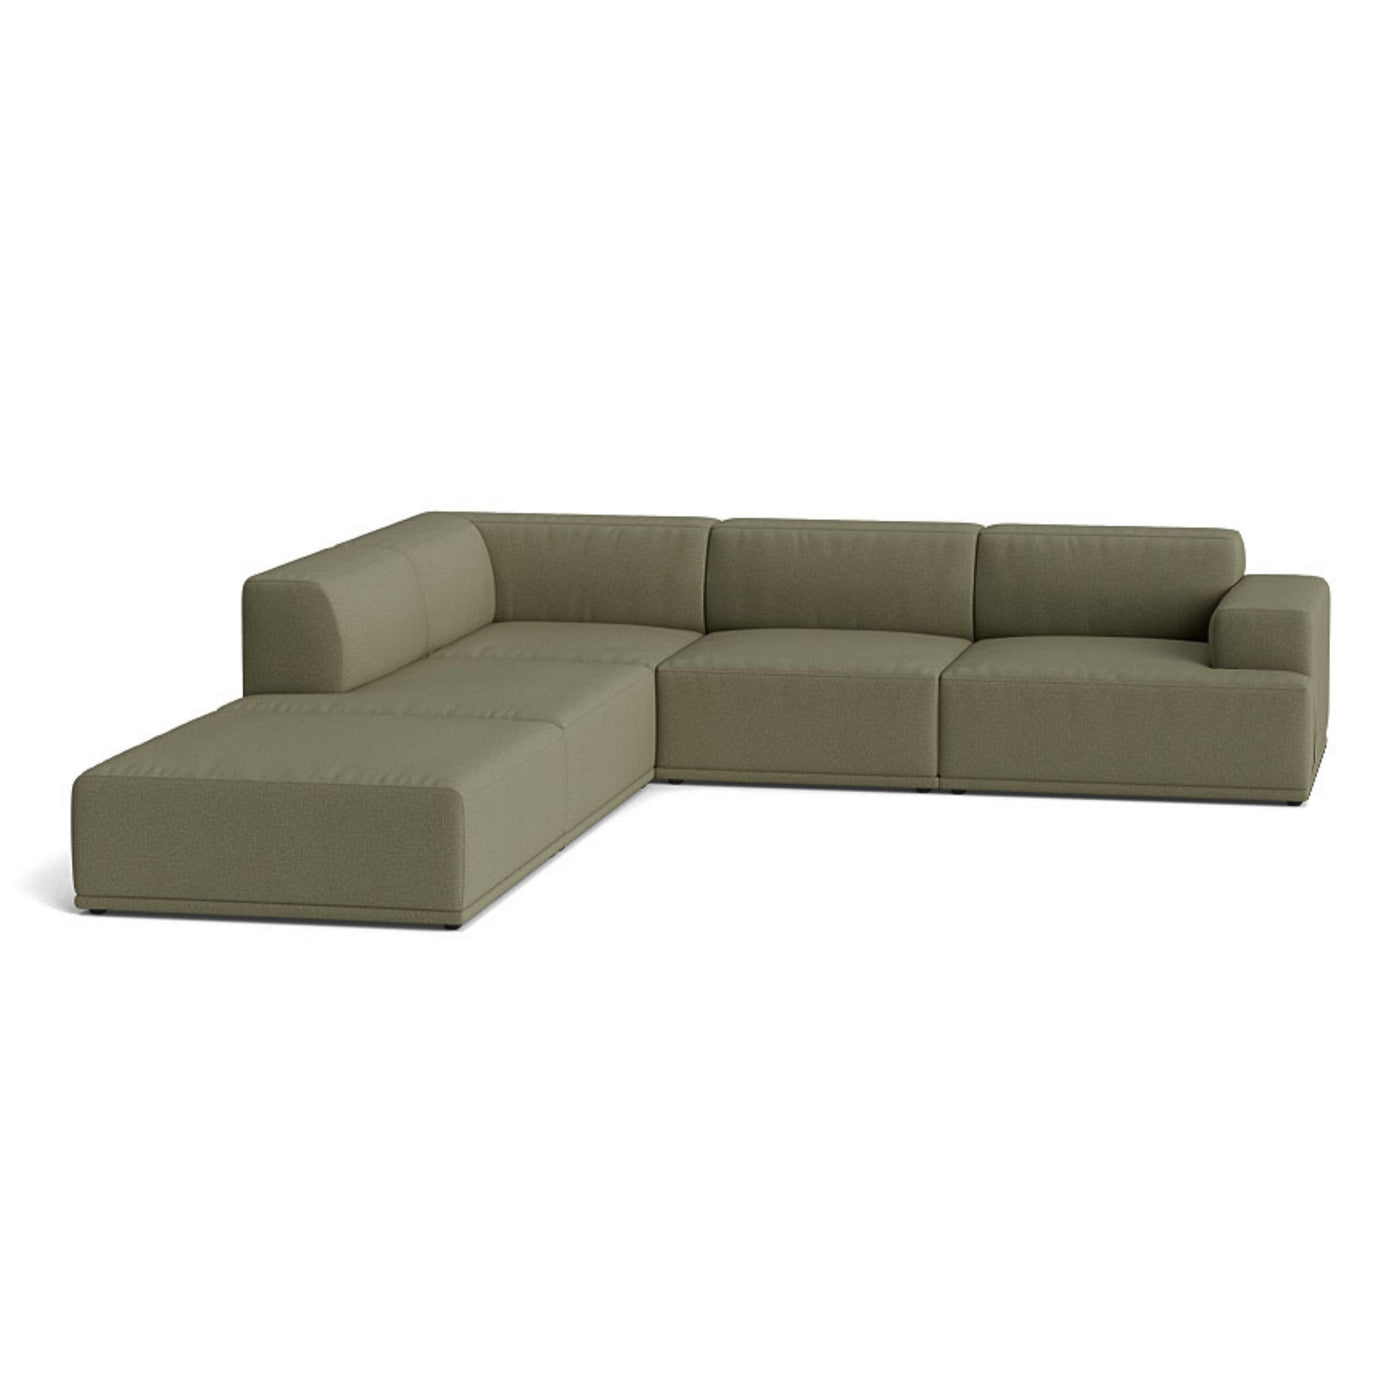 Muuto Connect Soft Modular Corner Sofa, configuration 1. Made-to-order from someday designs. #colour_clay-17